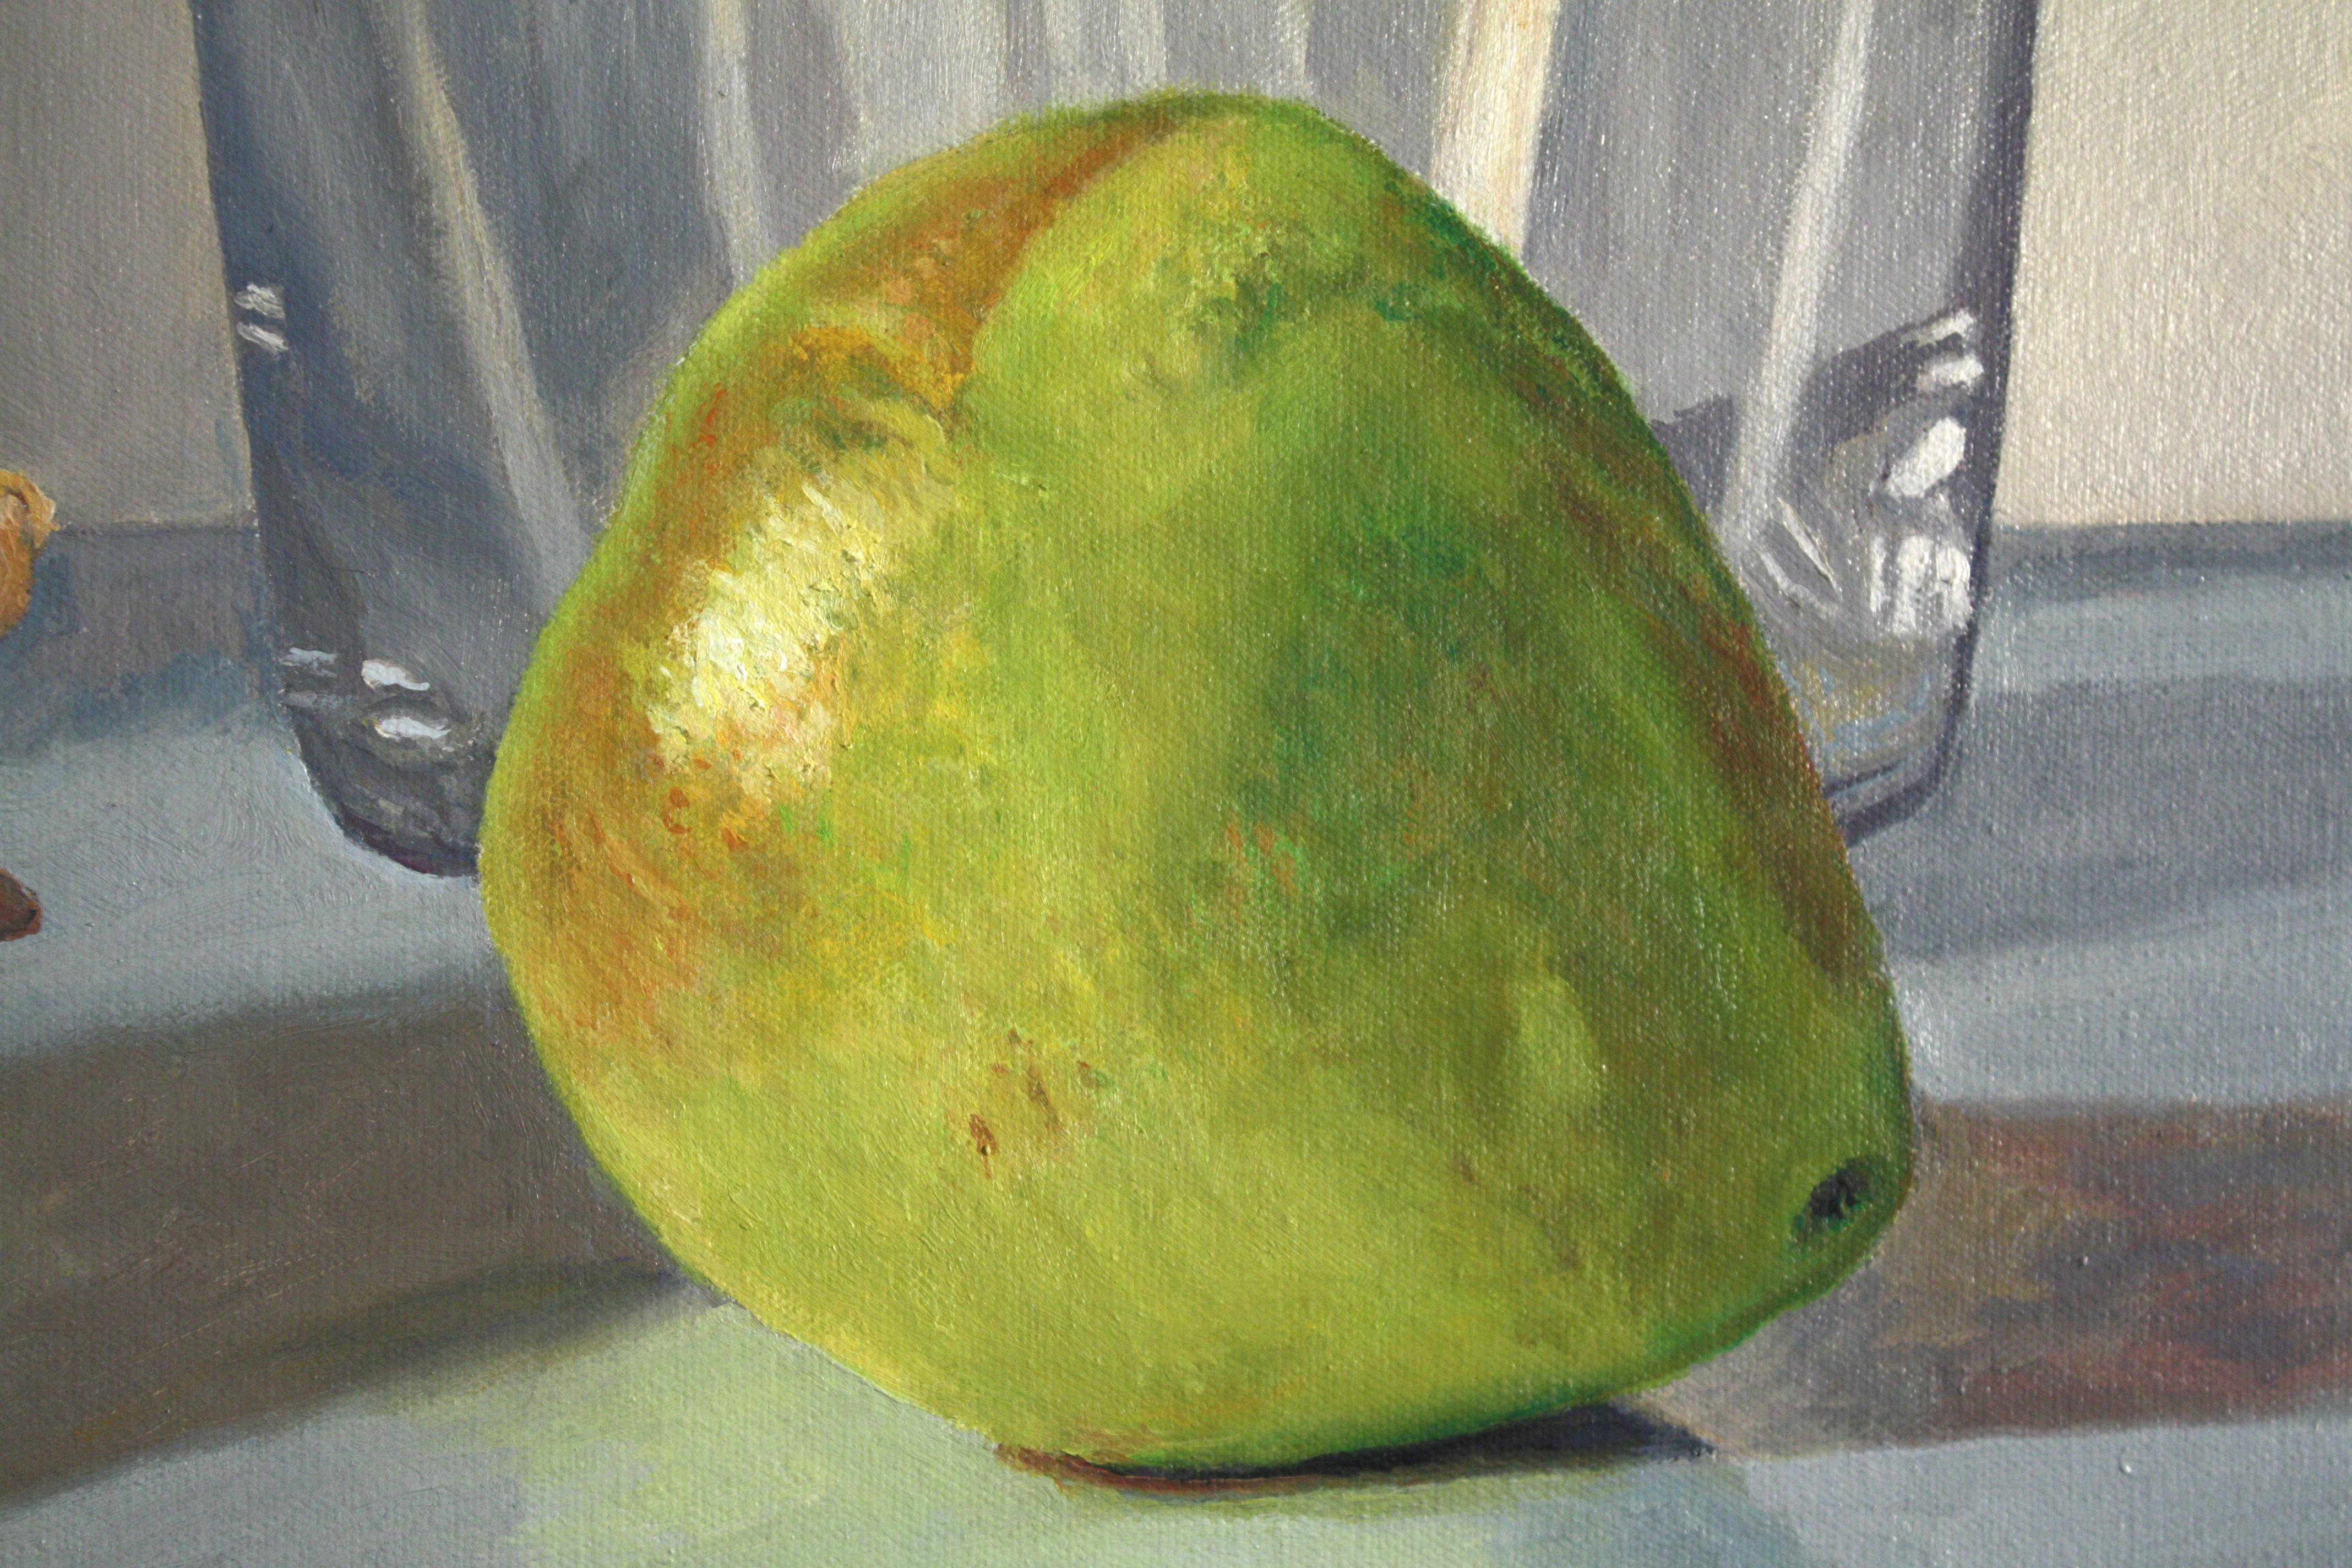 Shell and Pear, luminous realistic still life, food, grey tones - Painting by Douglas Newton